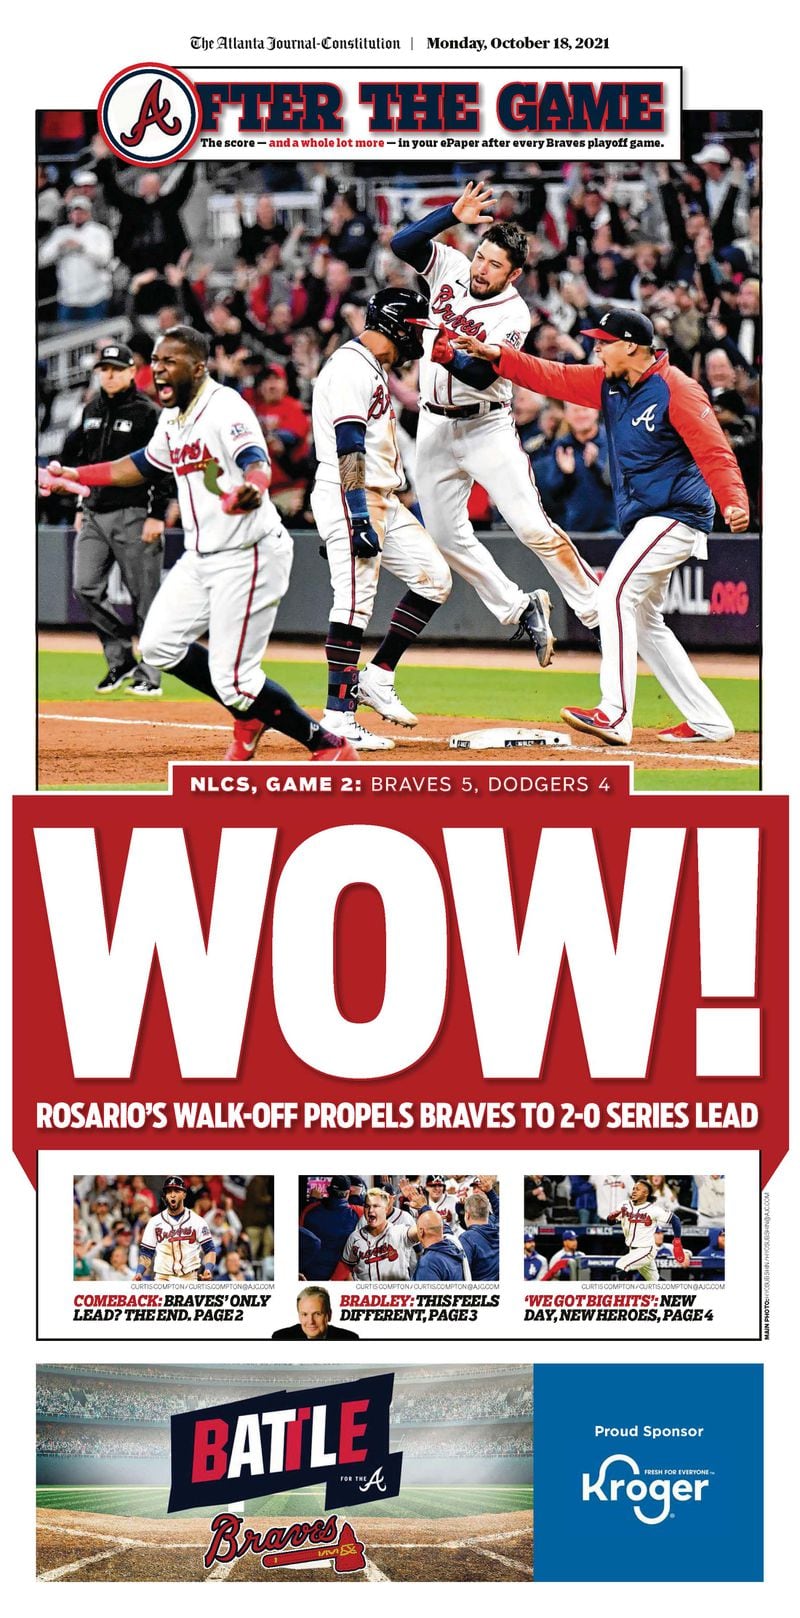 ‘Wow!’ – Atlanta Braves game section in Monday ePaper